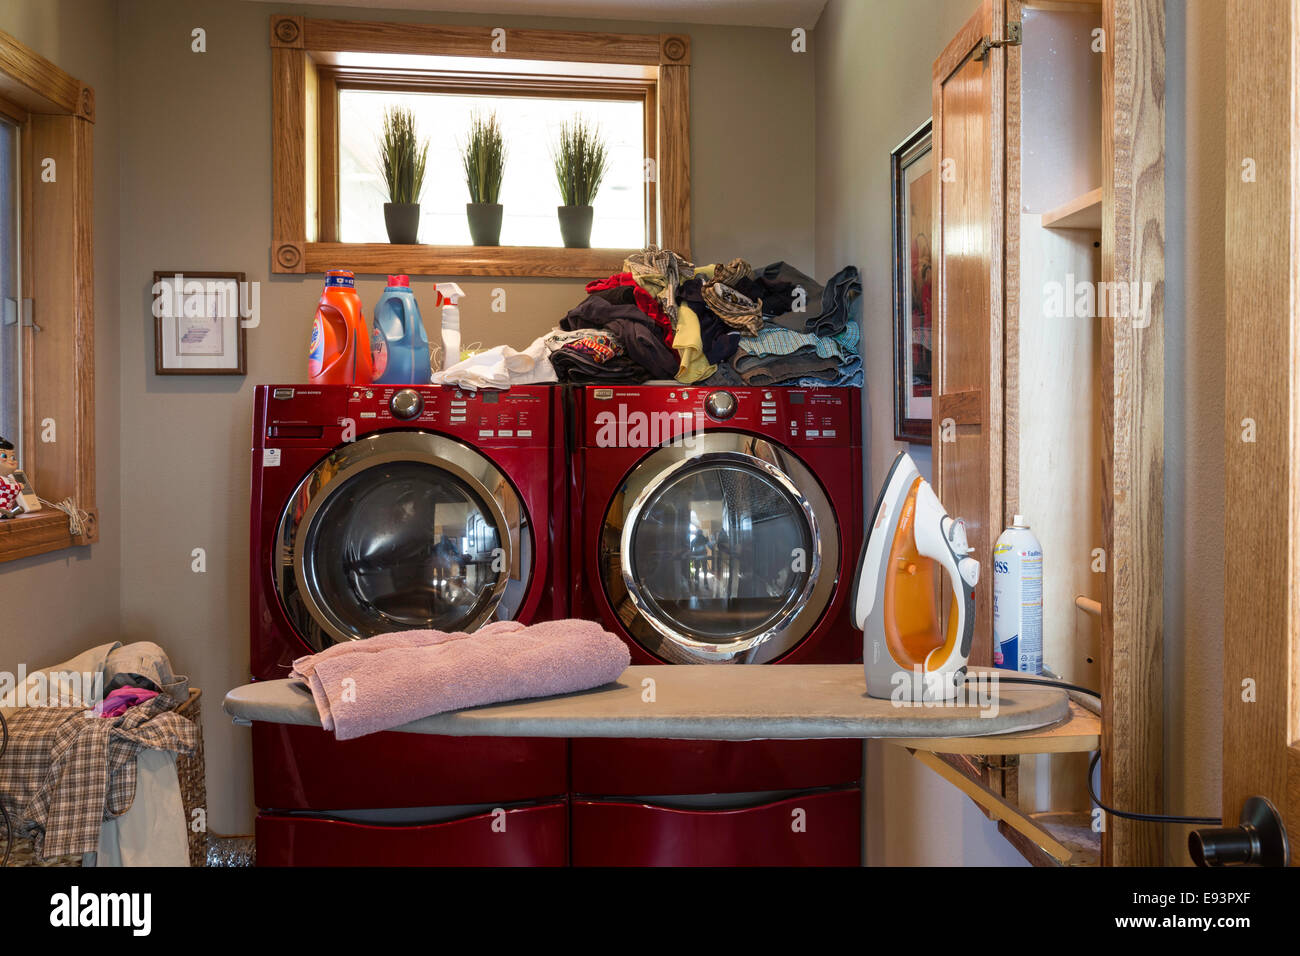 Residential Home Laundry Room With Modern Front Loading Washer And